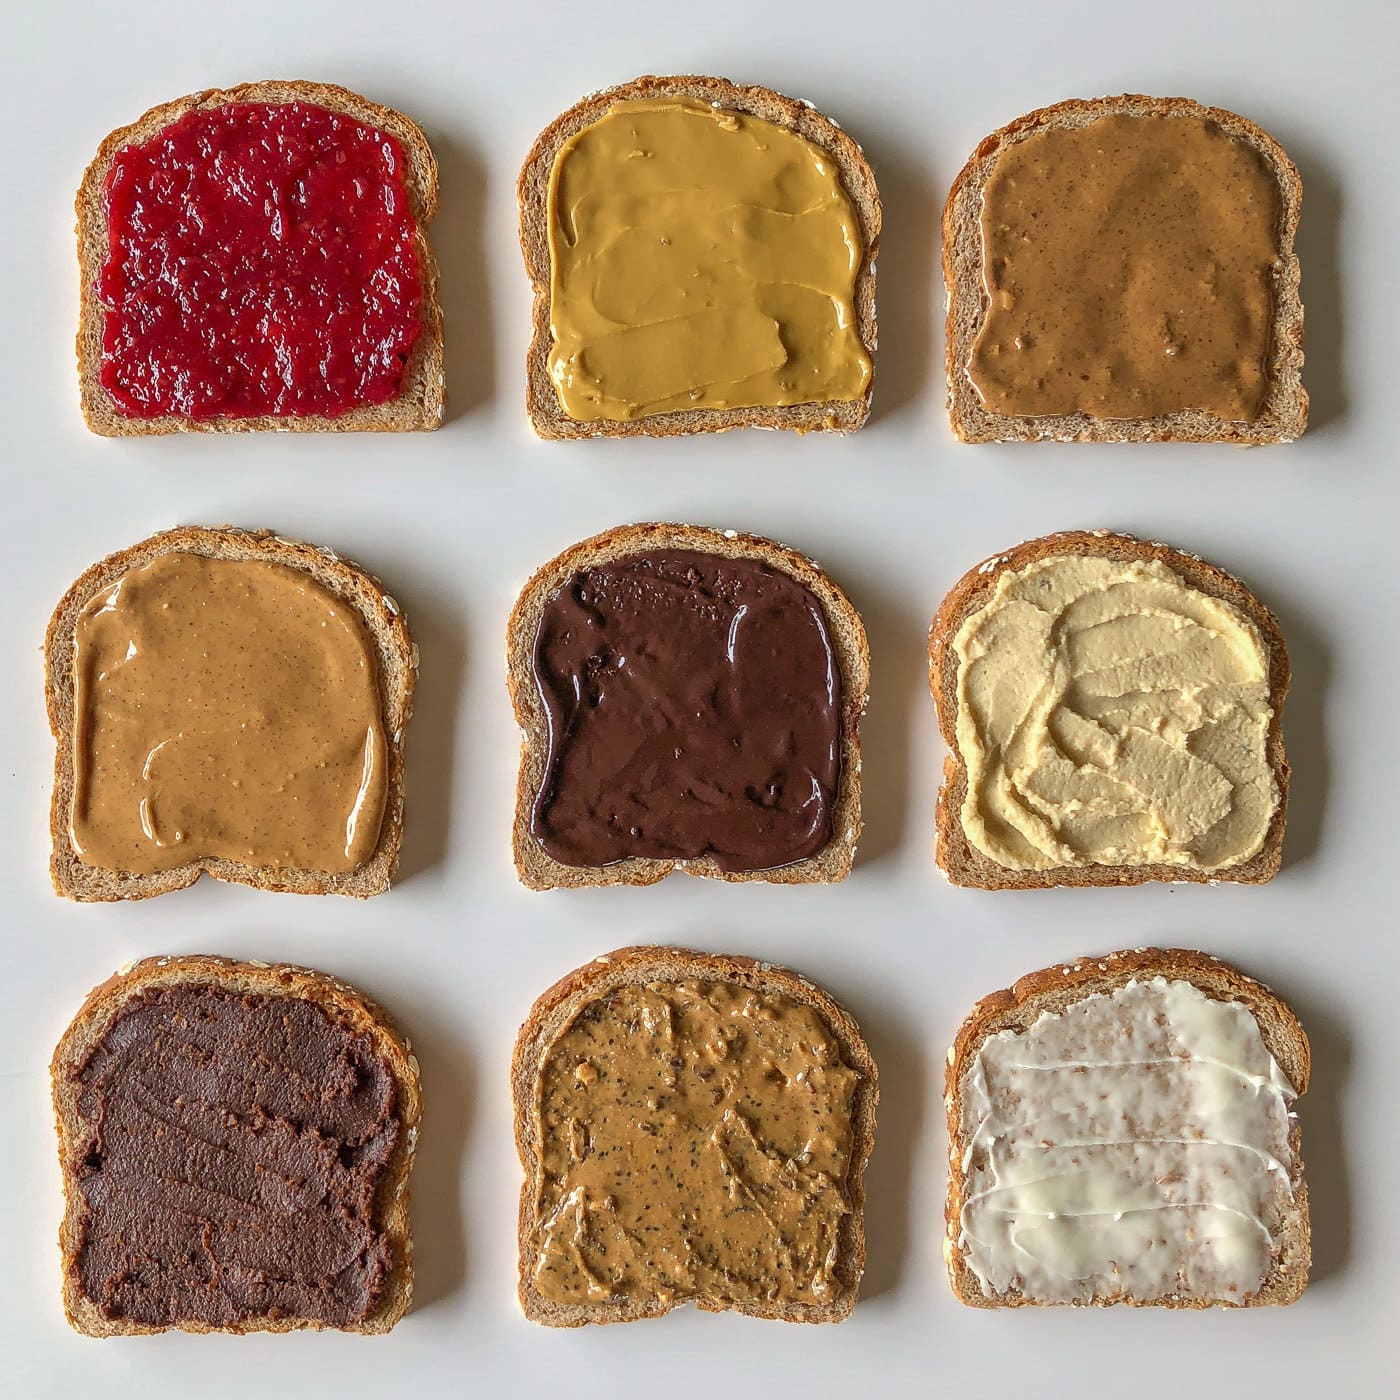 9 pieces of bread each covered with a different spread